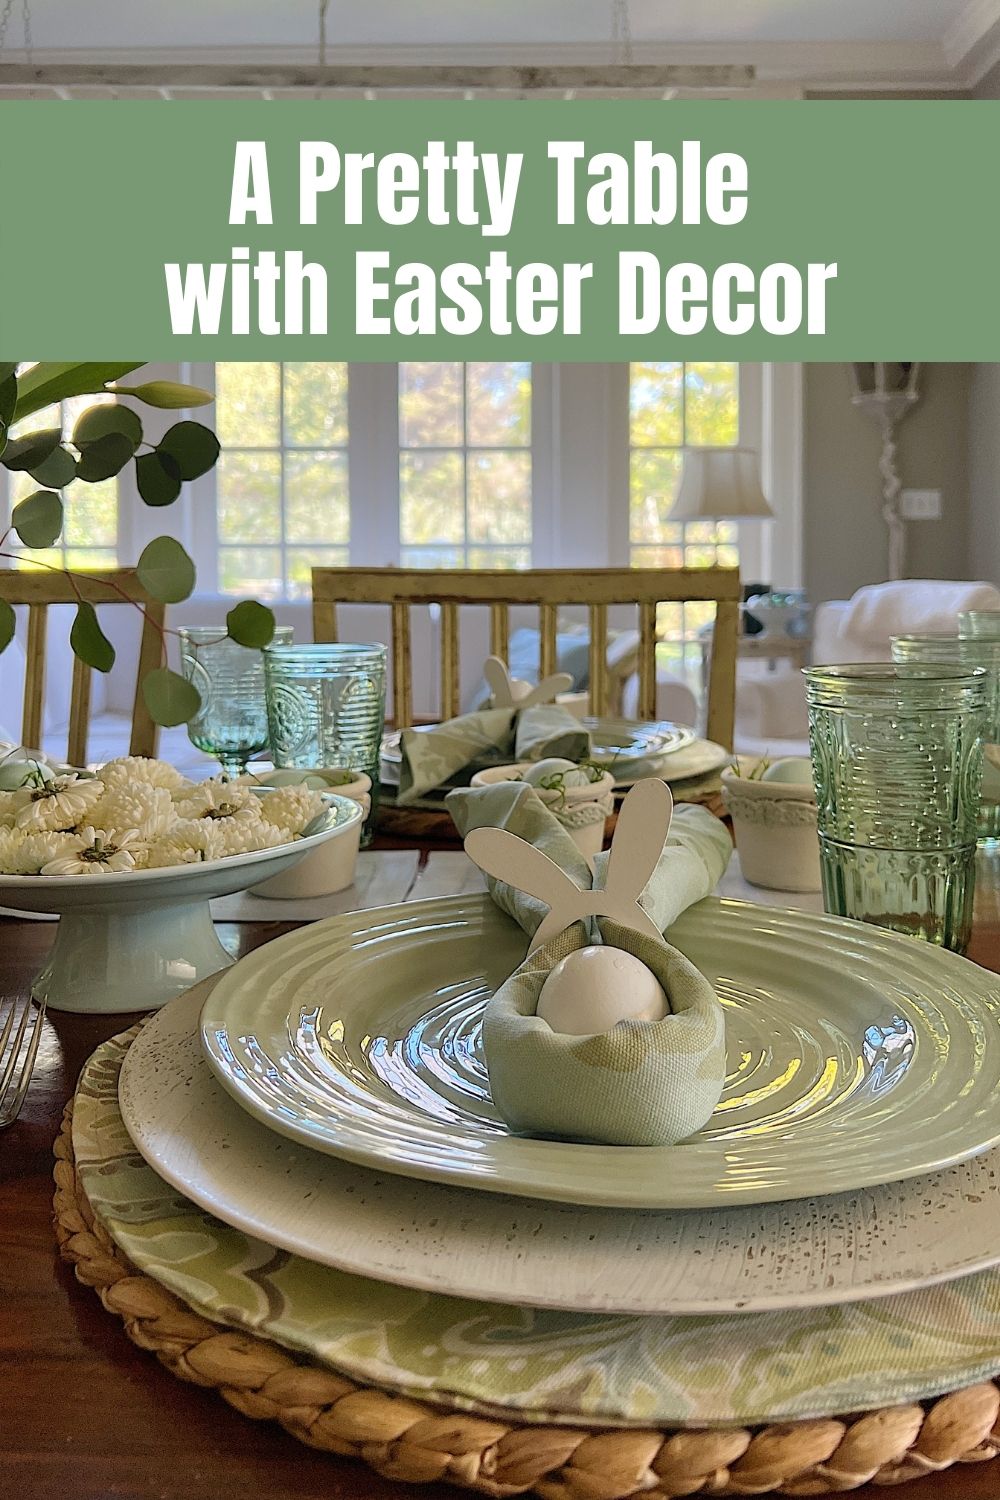 I created a table with Easter decor using decorative napkins, small egg pots, and a beautiful floral arrangement.